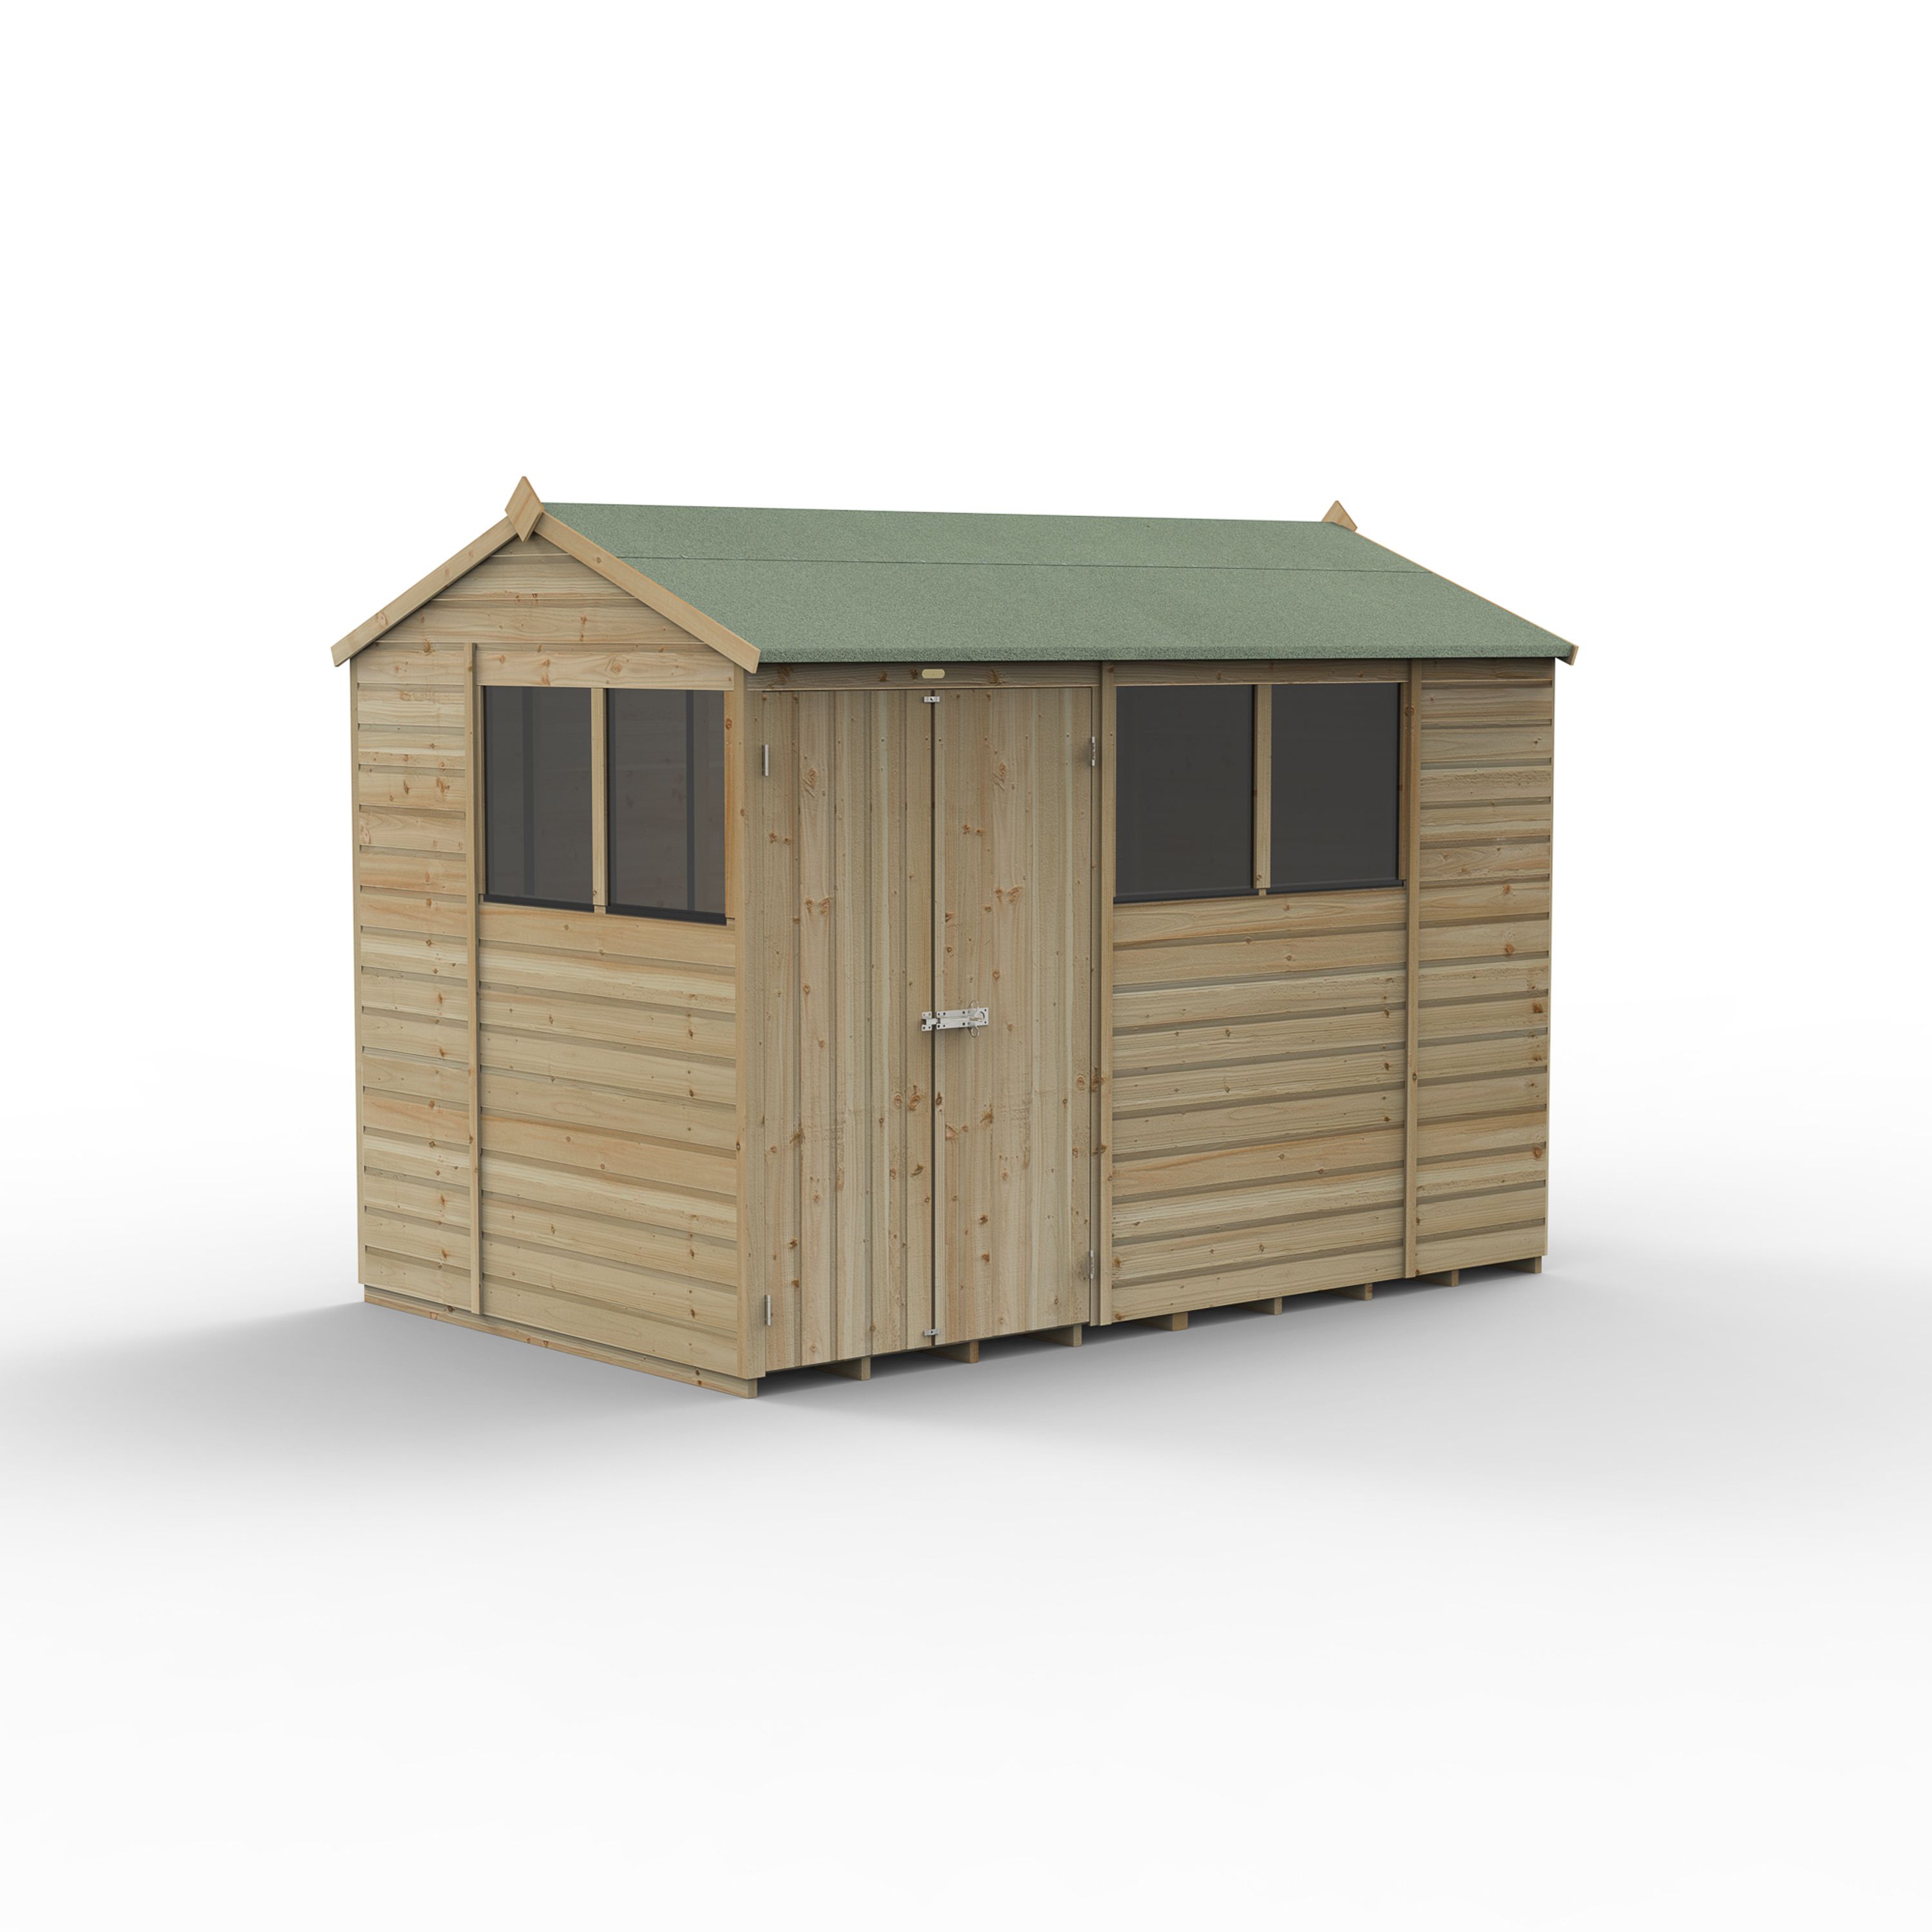 Forest Garden Beckwood 10x6 ft Reverse apex Natural timber Wooden 2 door Shed with floor & 4 windows (Base included)